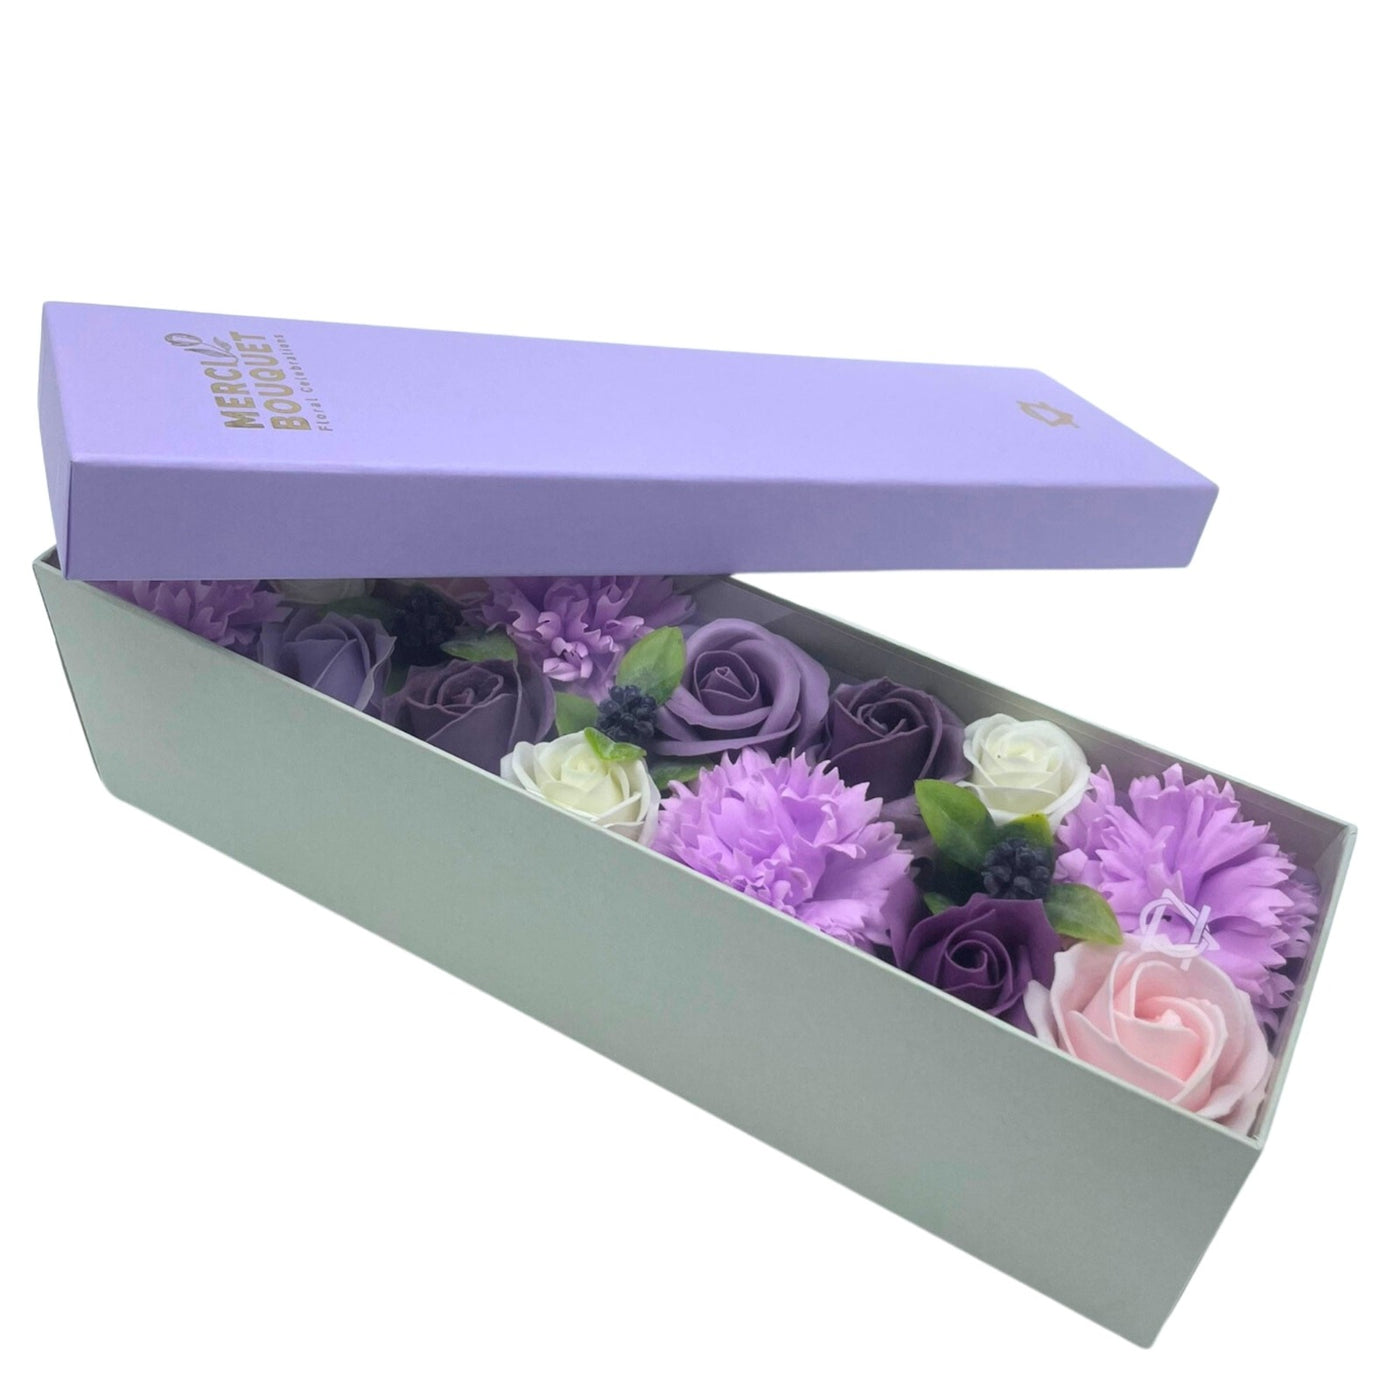 Lavender Roses And Carnations Body Soap Flowers In Gift Box